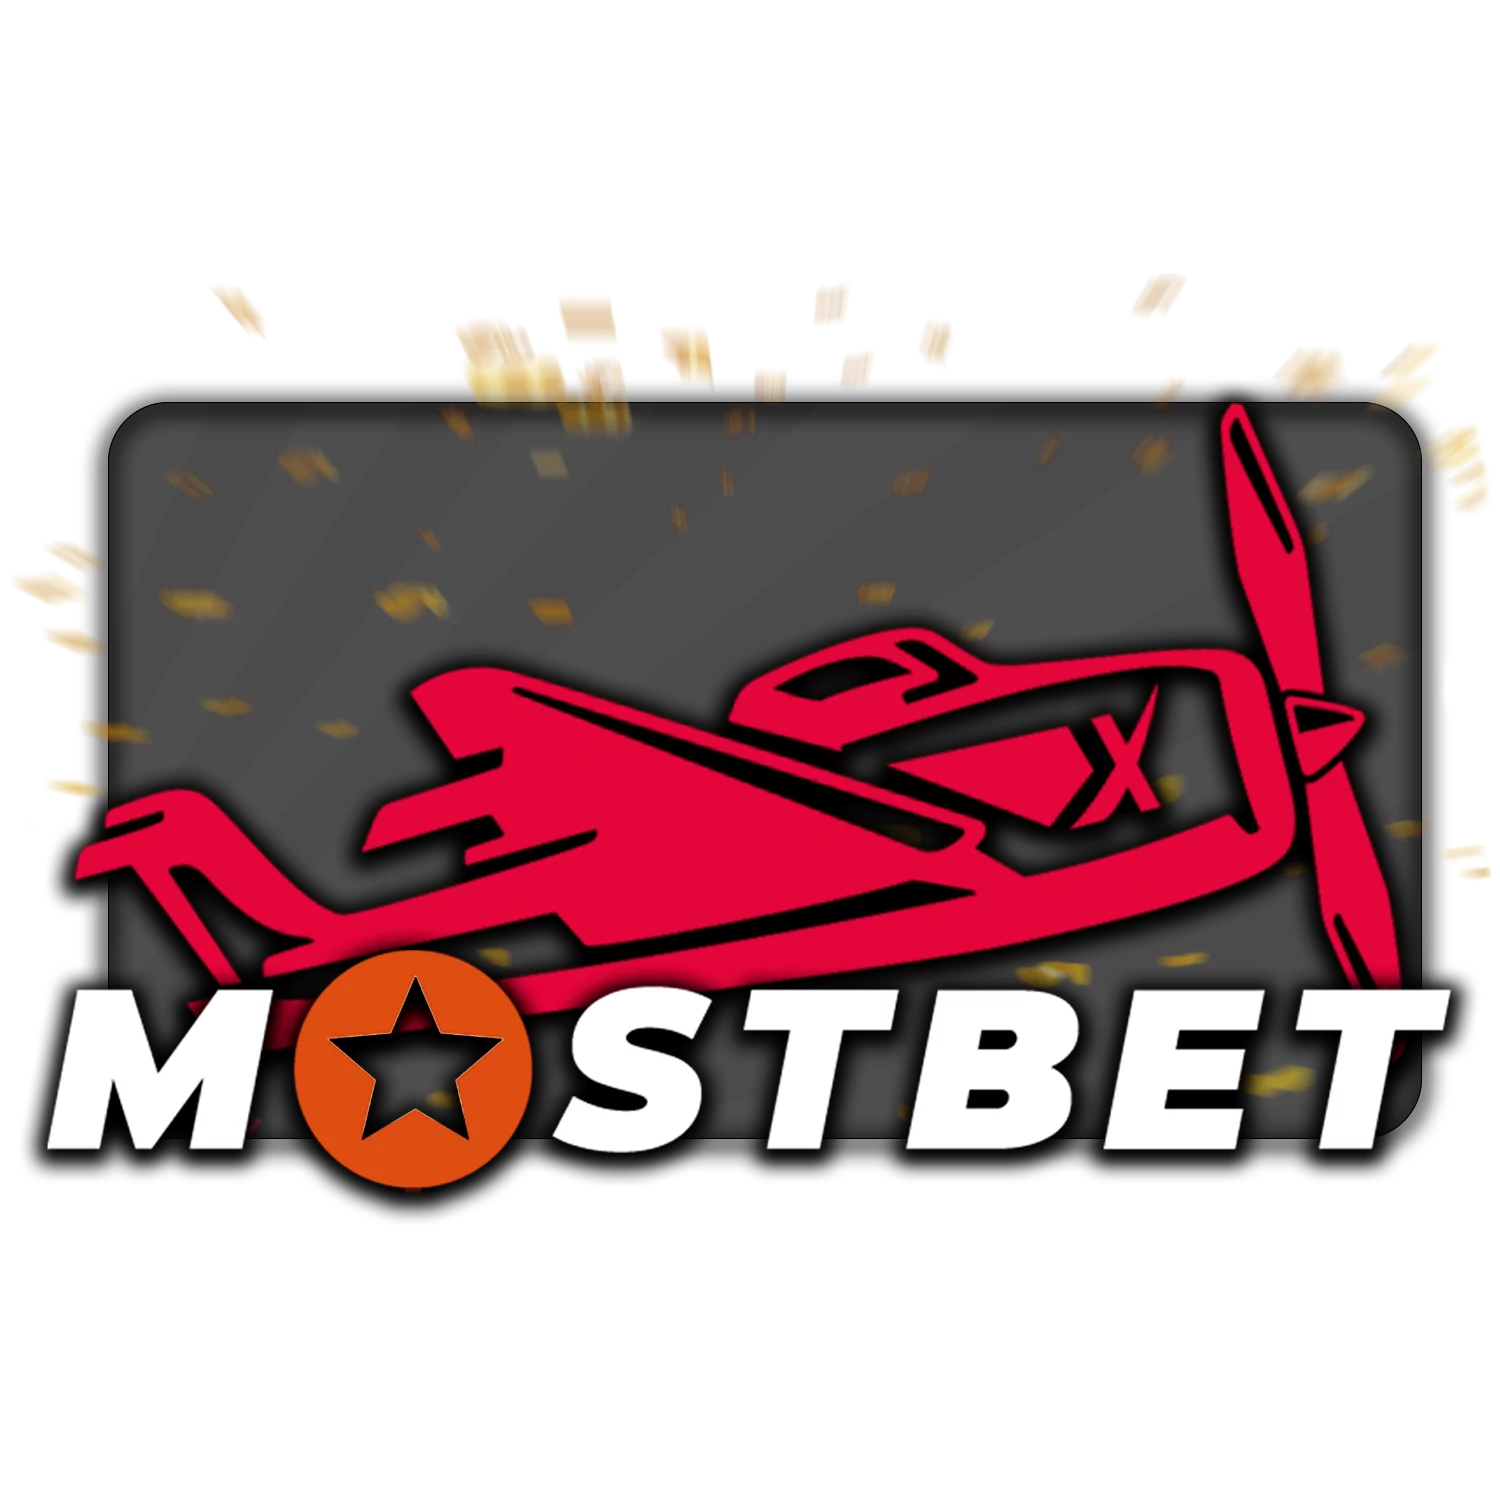 What Your Customers Really Think About Your Mostbet Casino stands out as a top-tier online gaming destination, offering a wide range of casino games, including the unique Mostbet Aviator. With its user-friendly interface and diverse gaming options, Mostbet Casino is an excellent choice for online g?